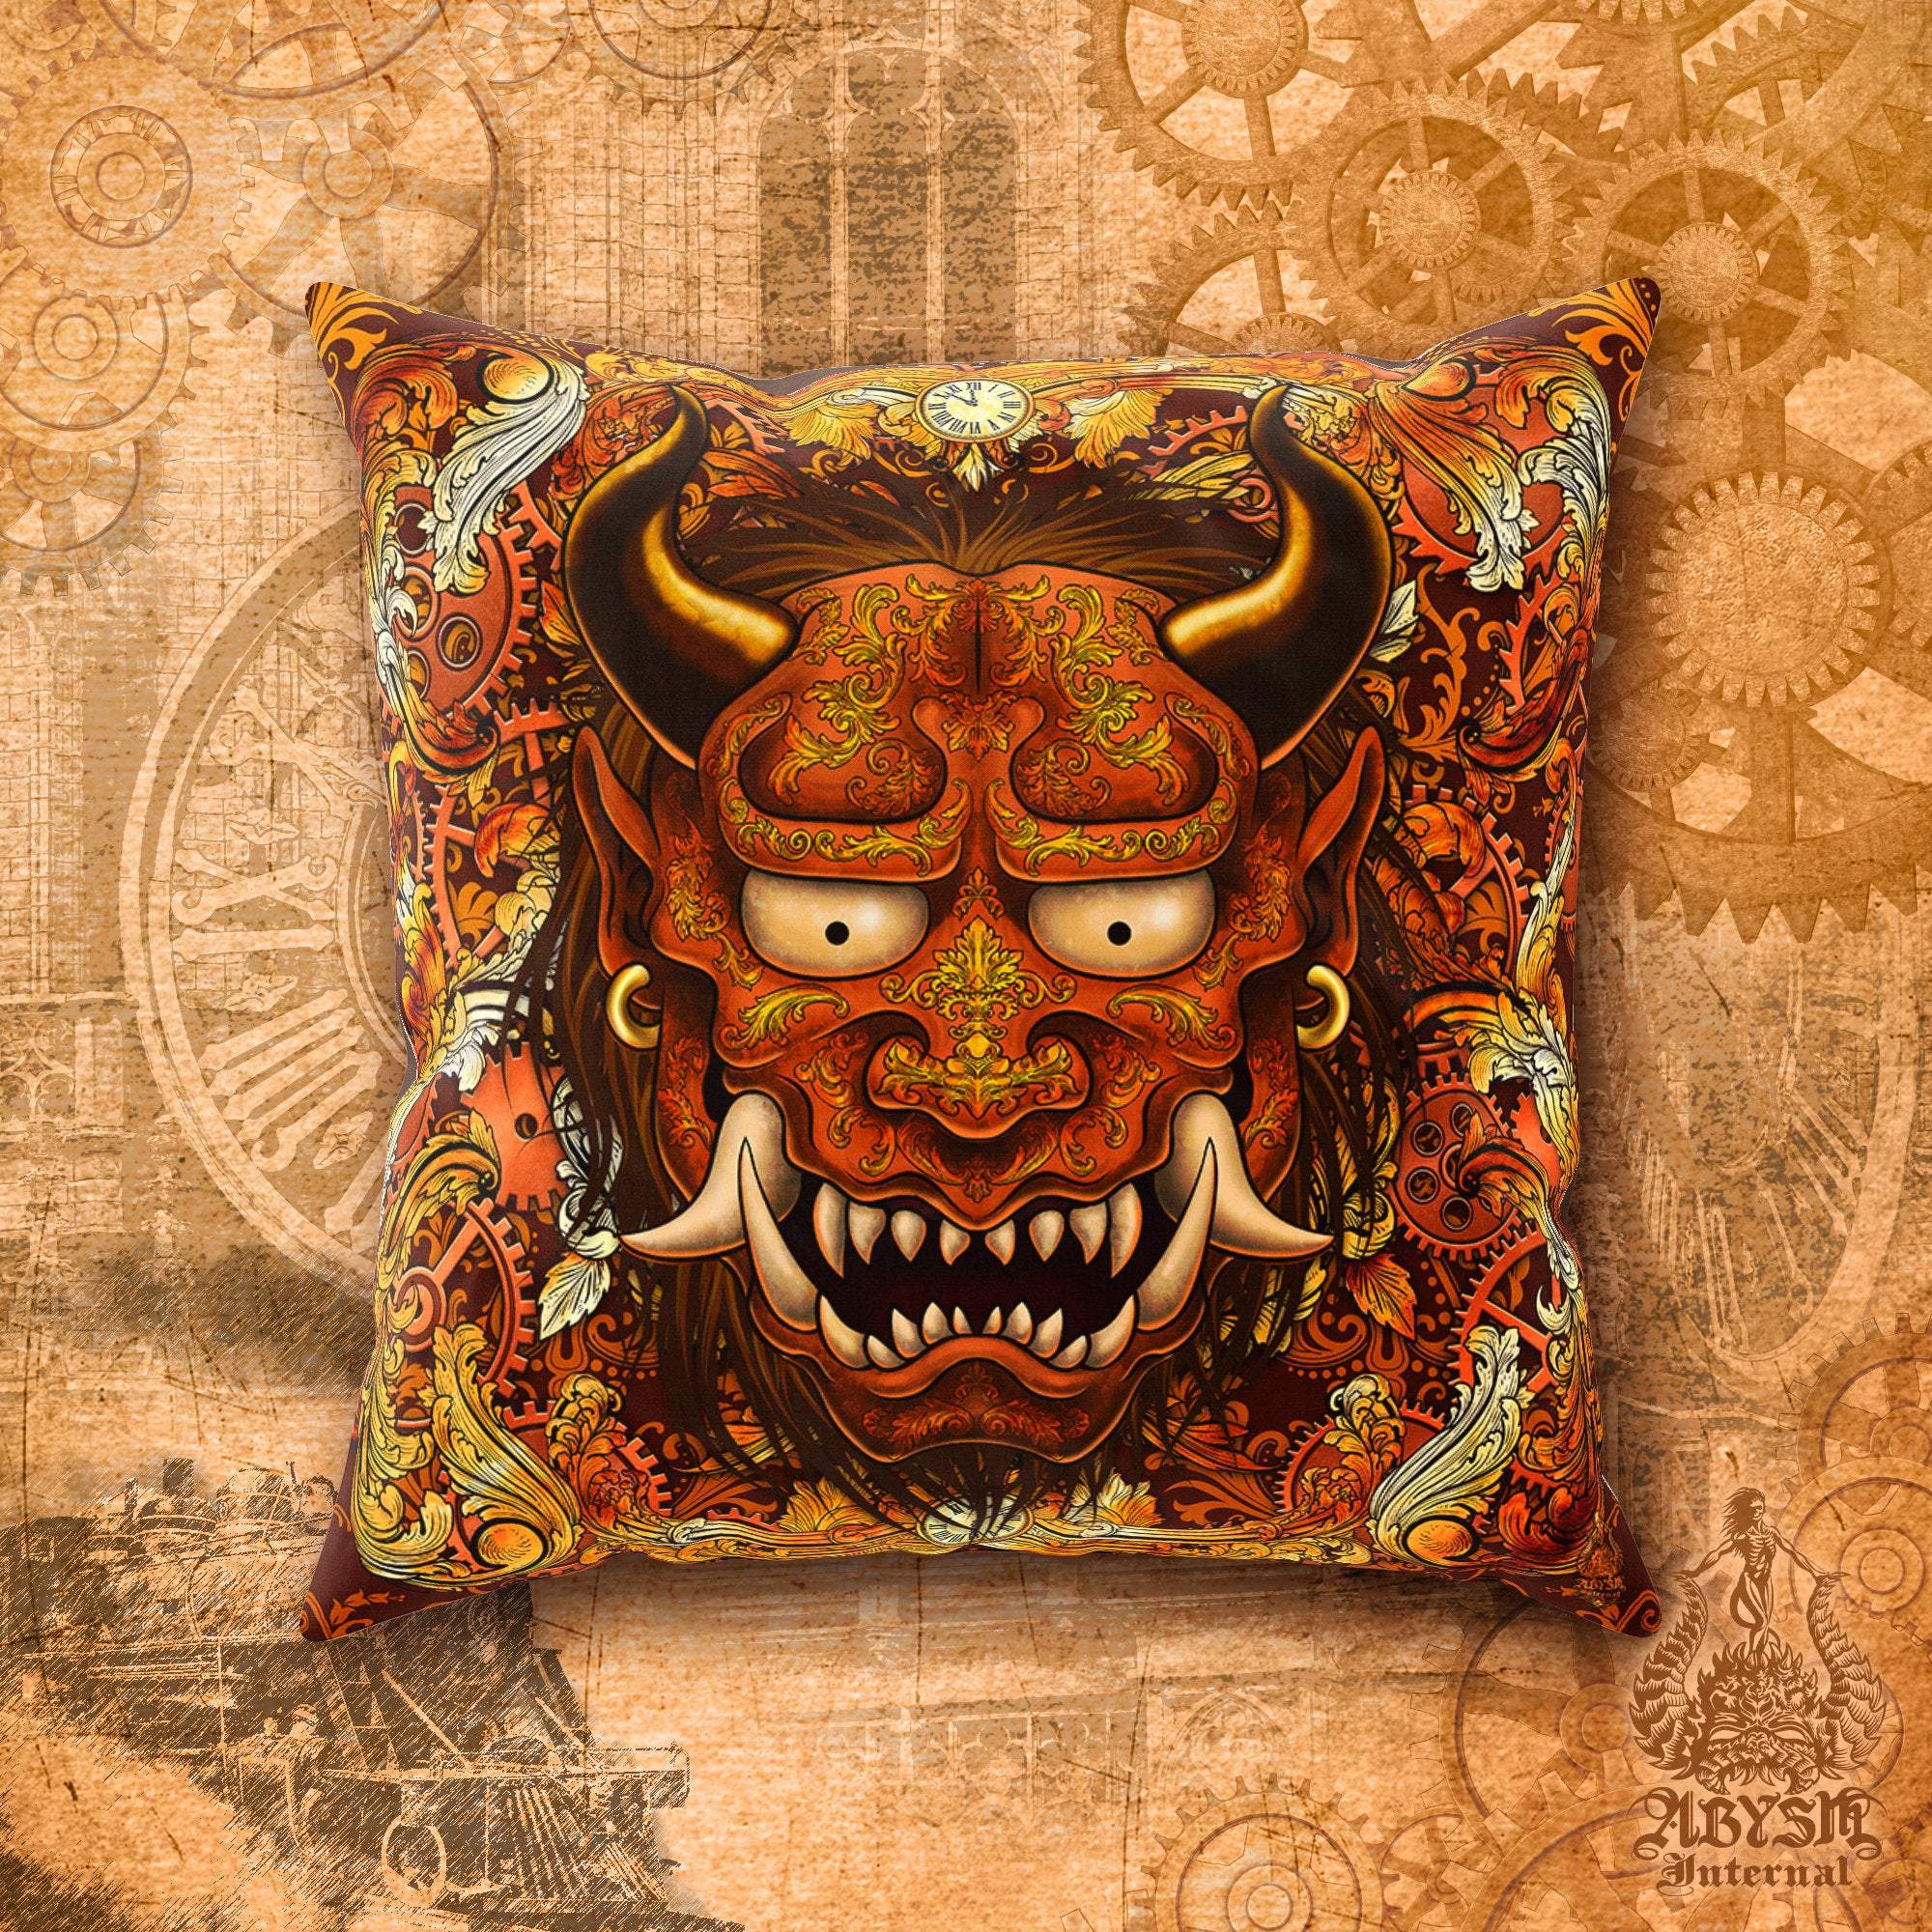 Oni Throw Pillow, Decorative Accent Cushion, Hannya, Japanese Demon, Anime and Gamer Room Decor - Steampunk - Abysm Internal